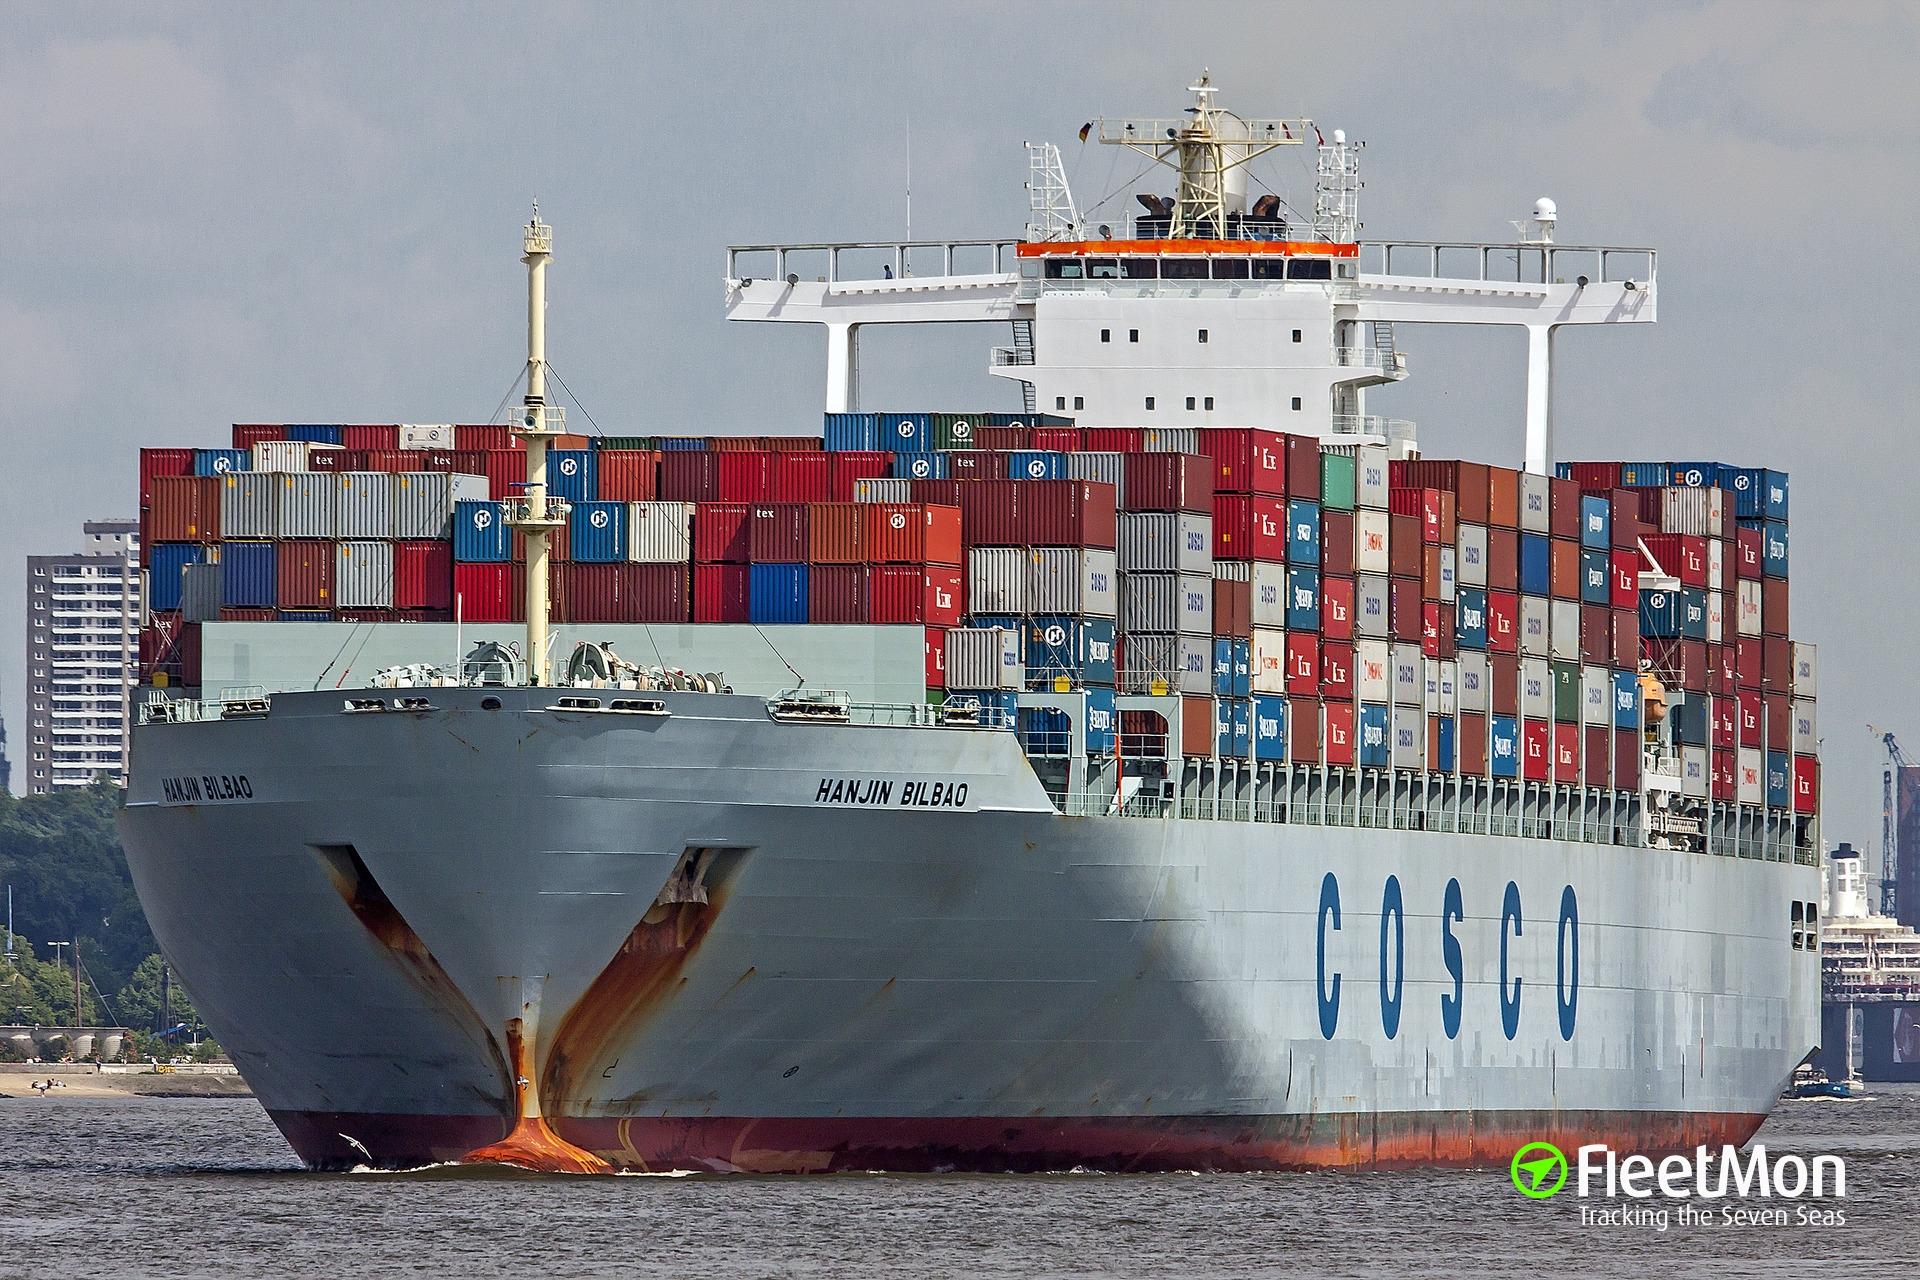 cosco tracking containers